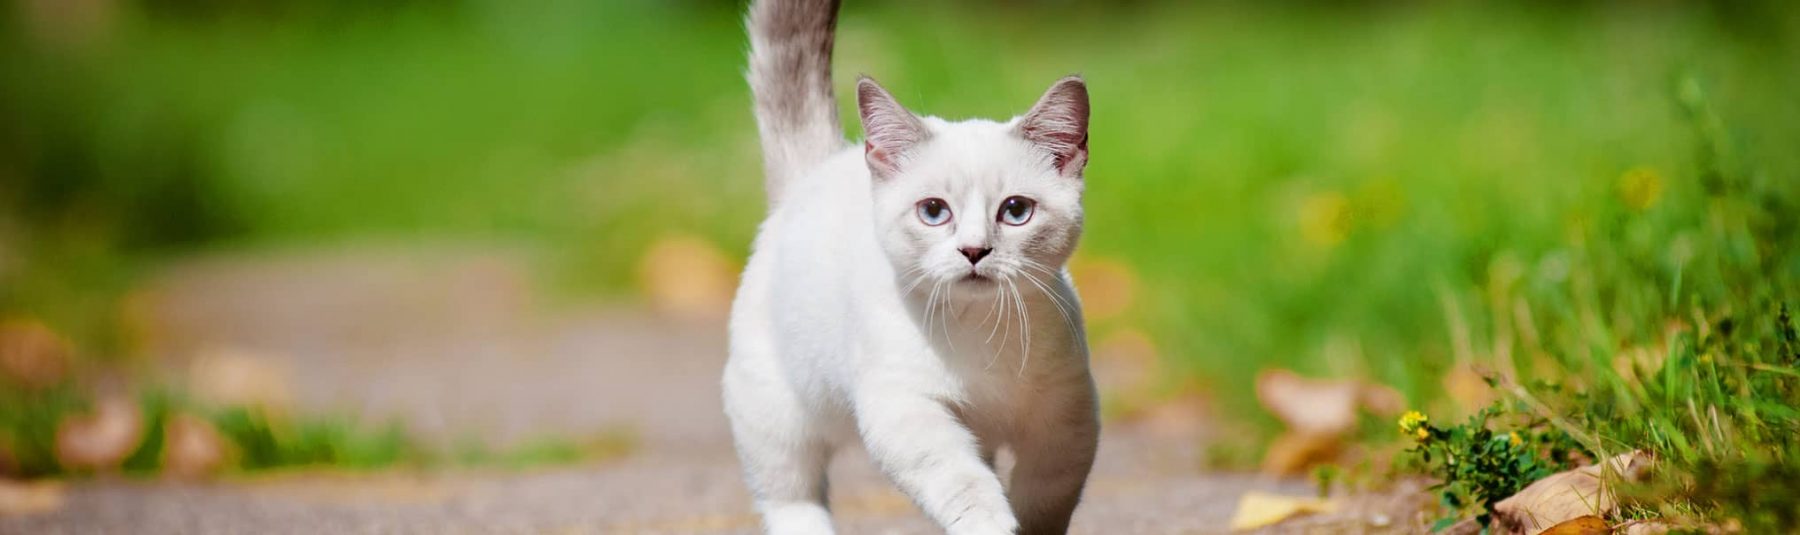 White cat walking on a path